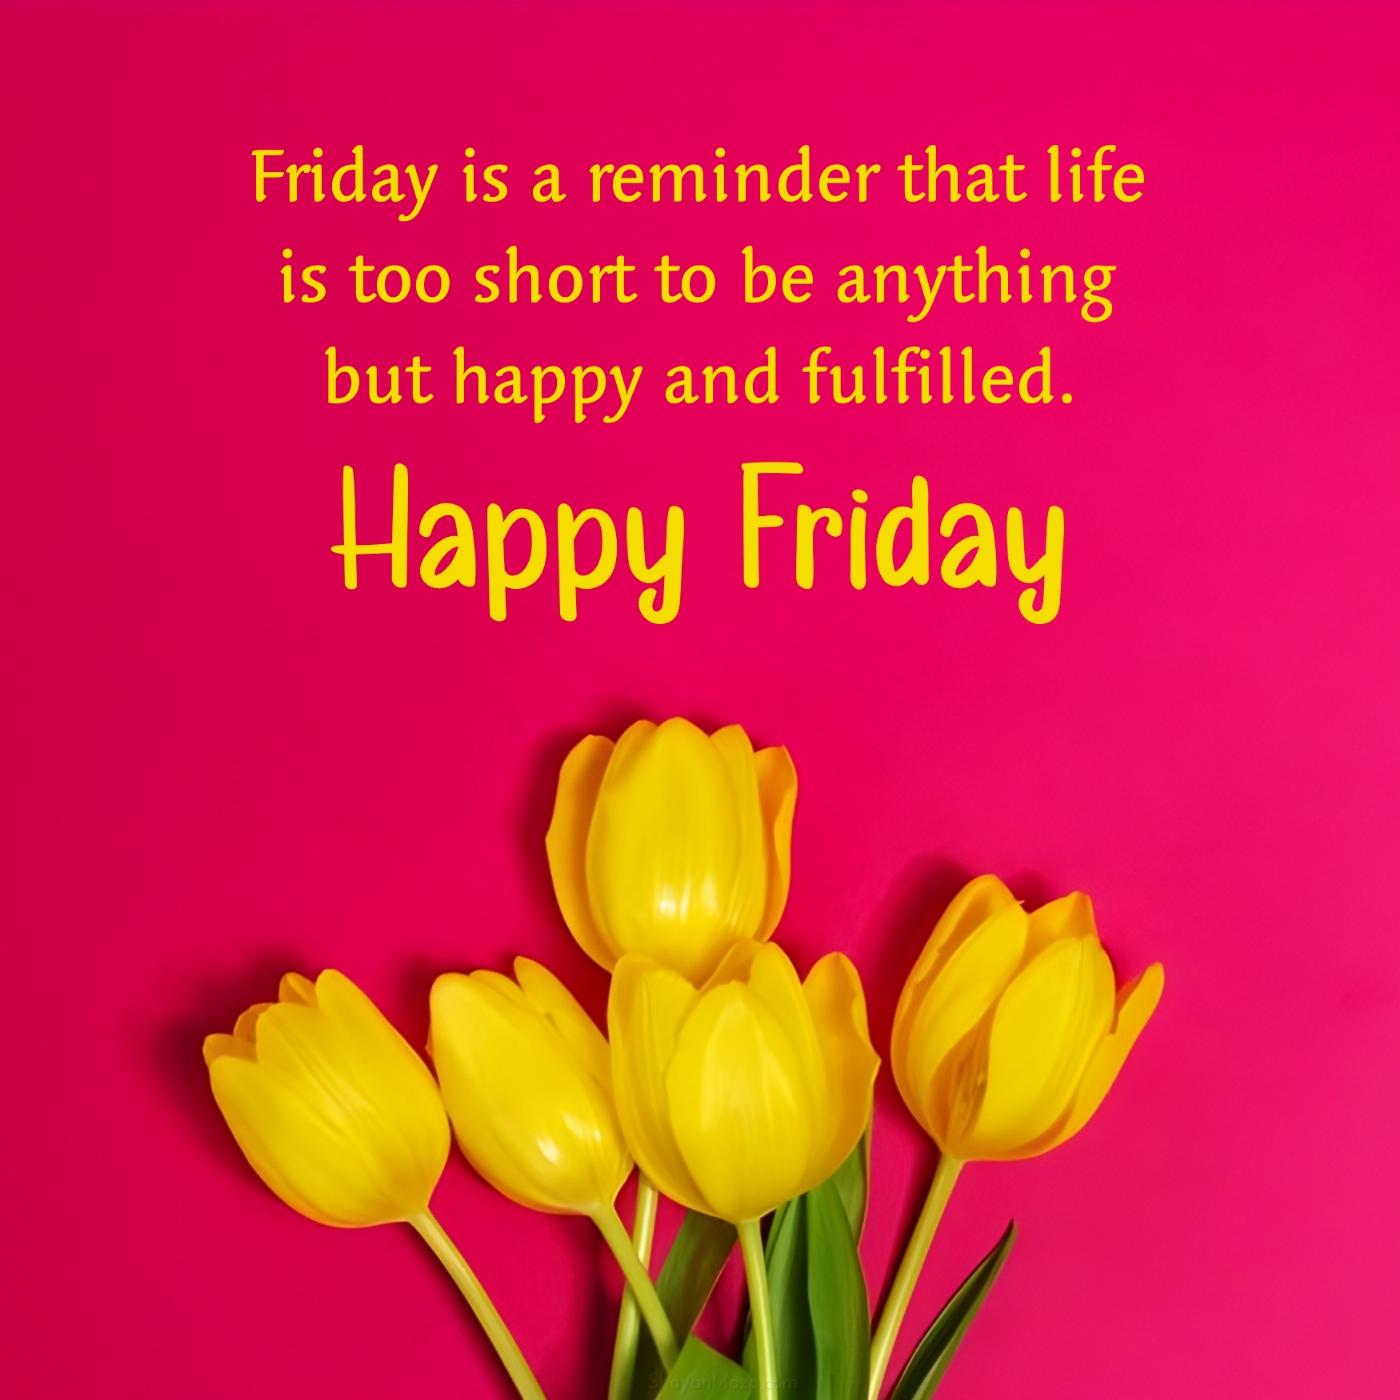 Friday is a reminder that life is too short to be anything